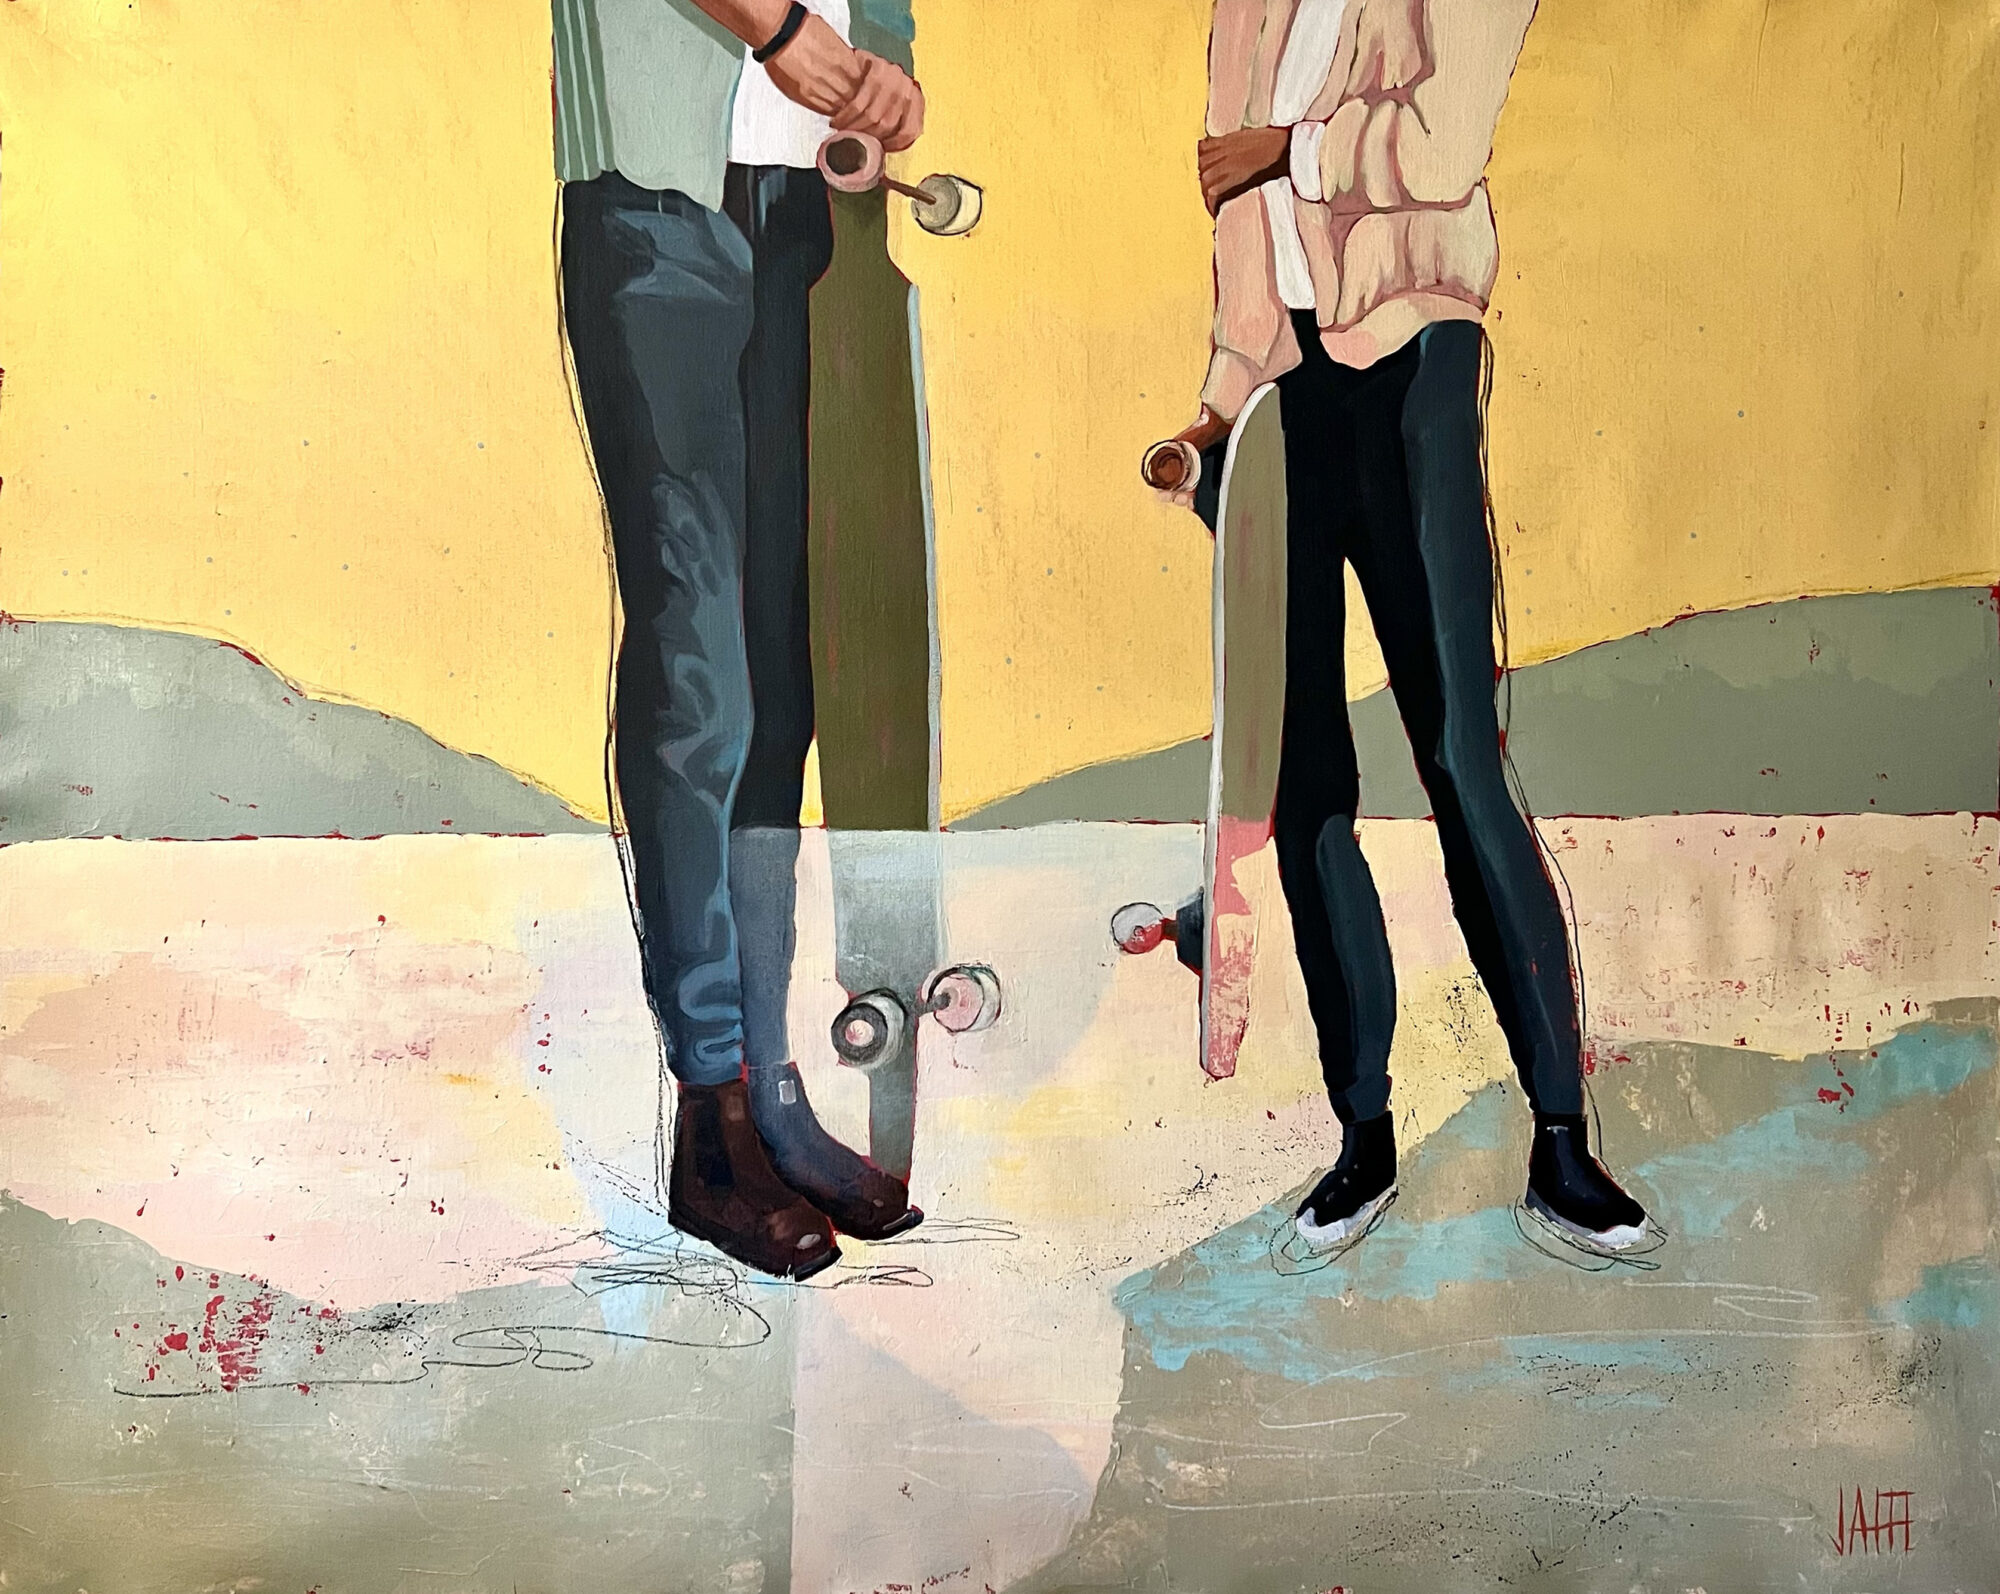 Megan Jaffe_SKATEBOARDERS_30 x 60 inches_oil on canvas copy